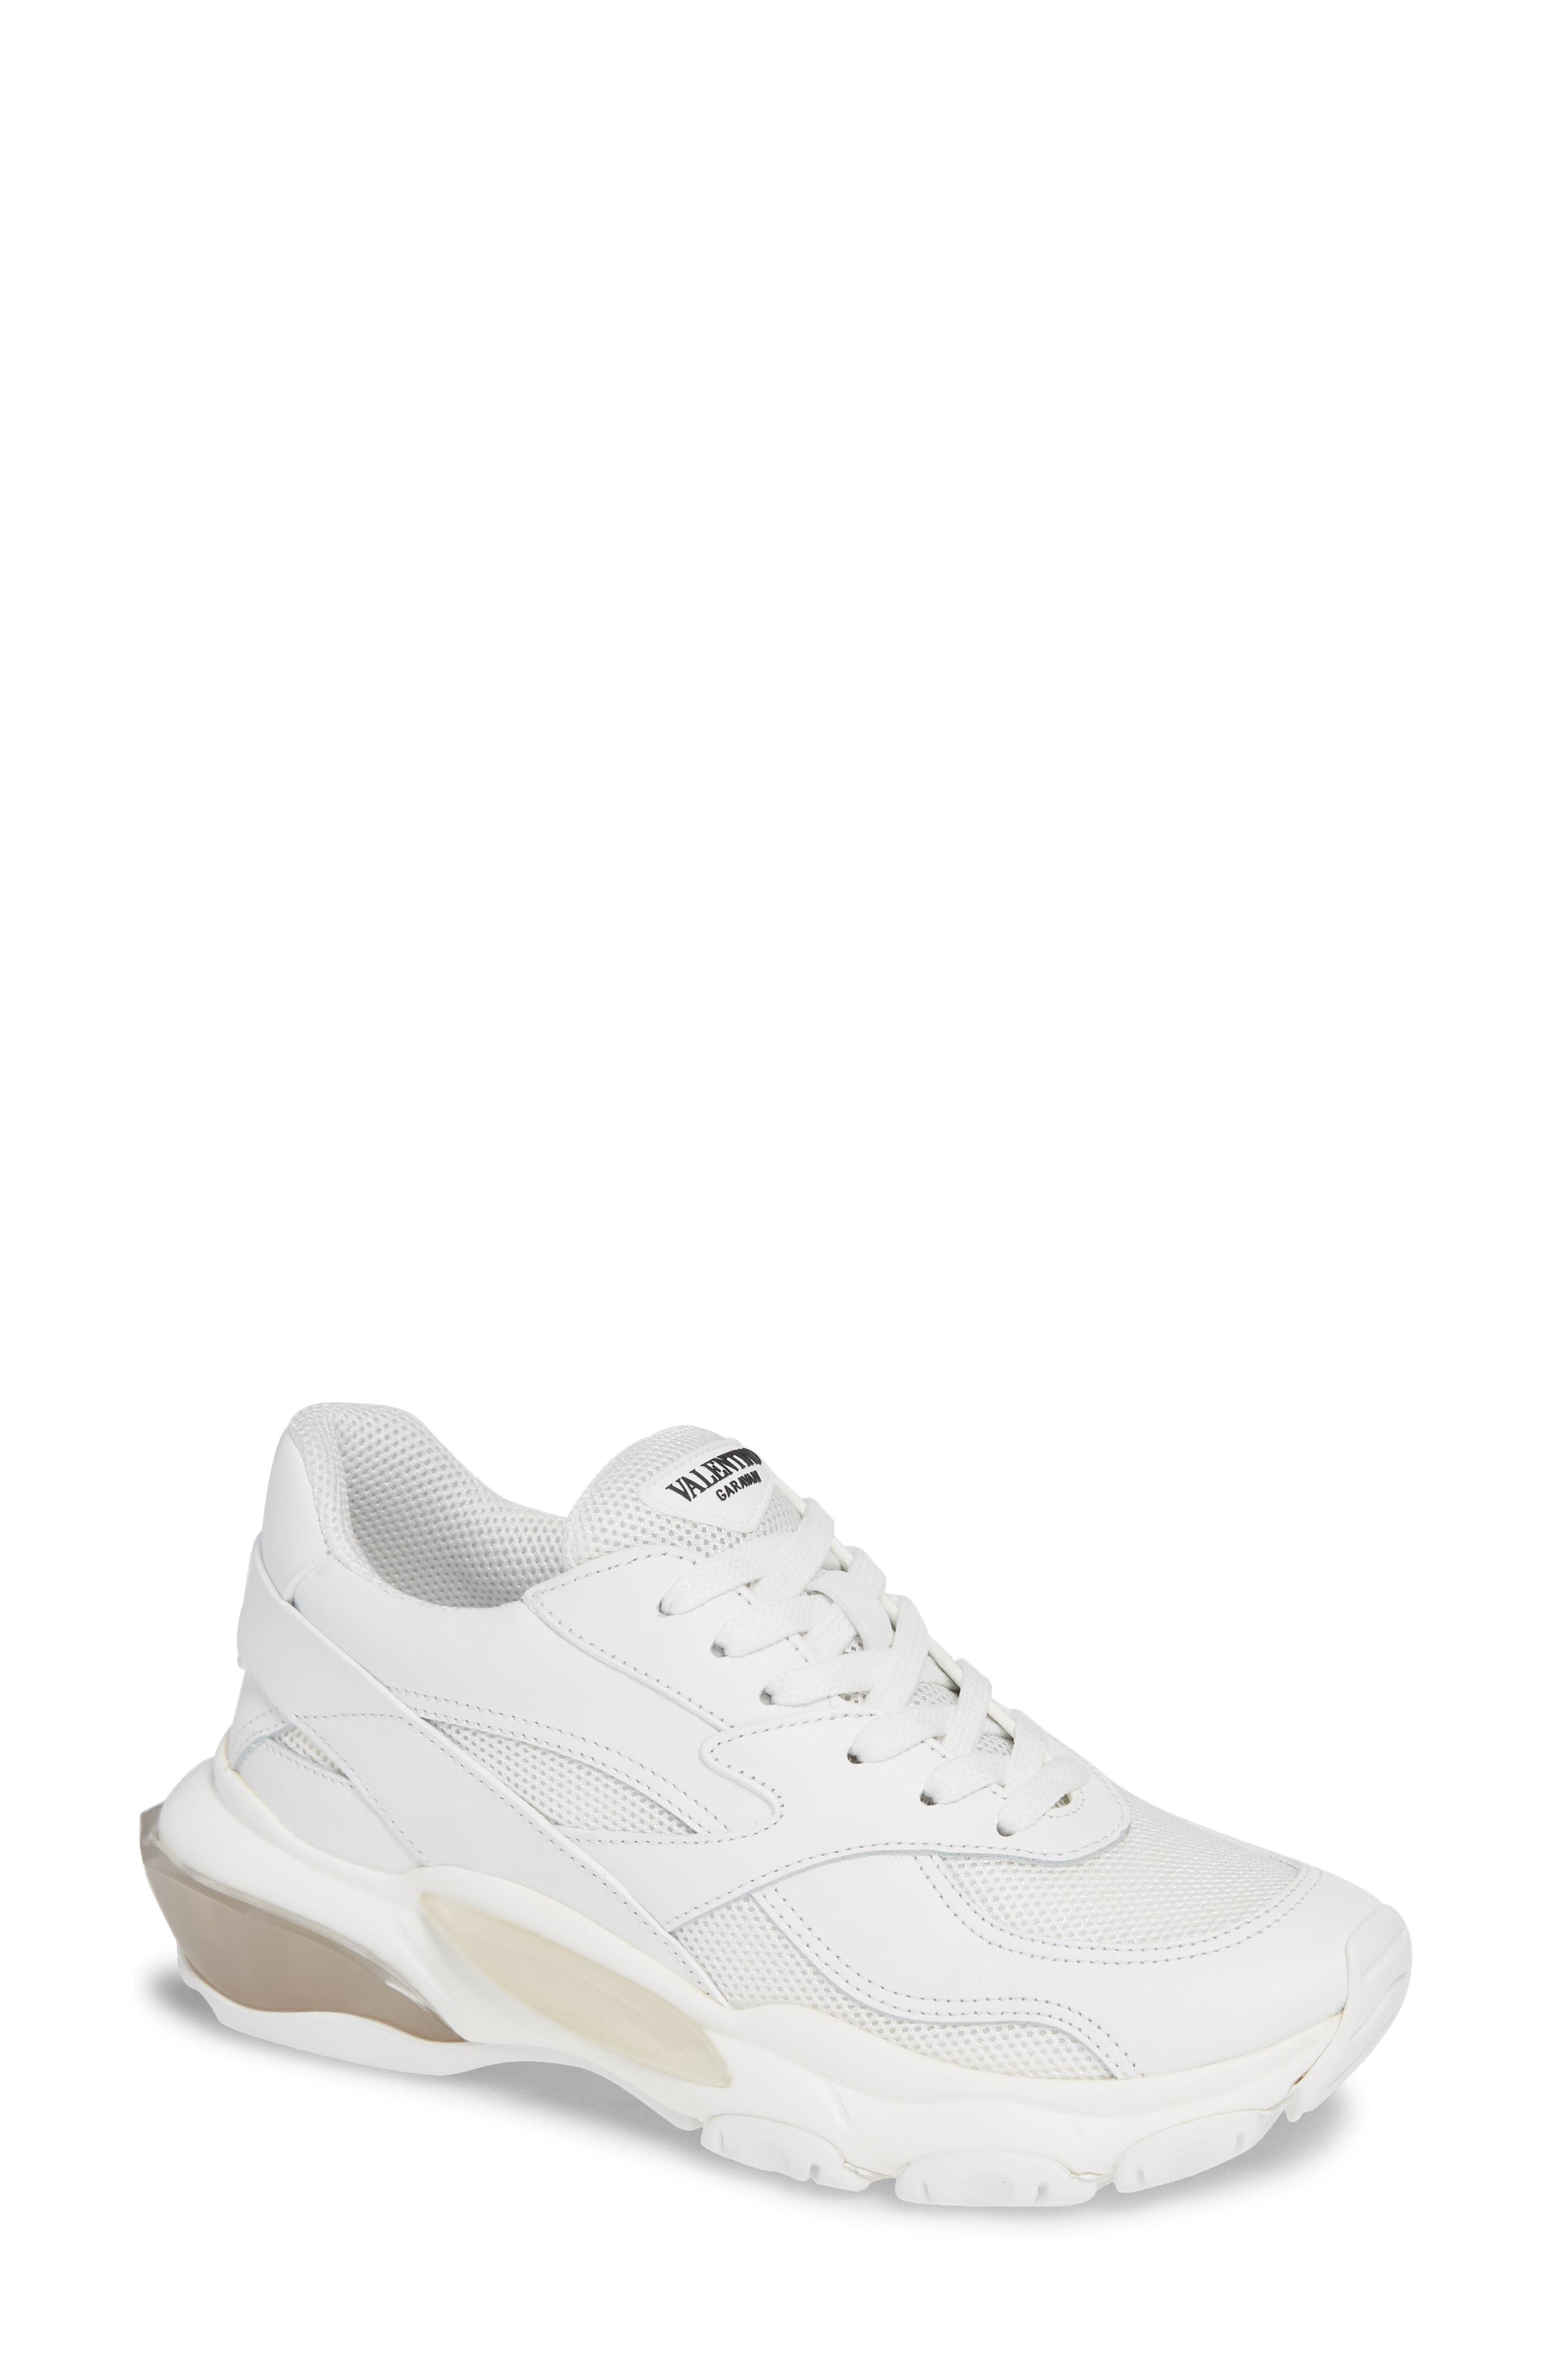 valentino bounce low top sneaker